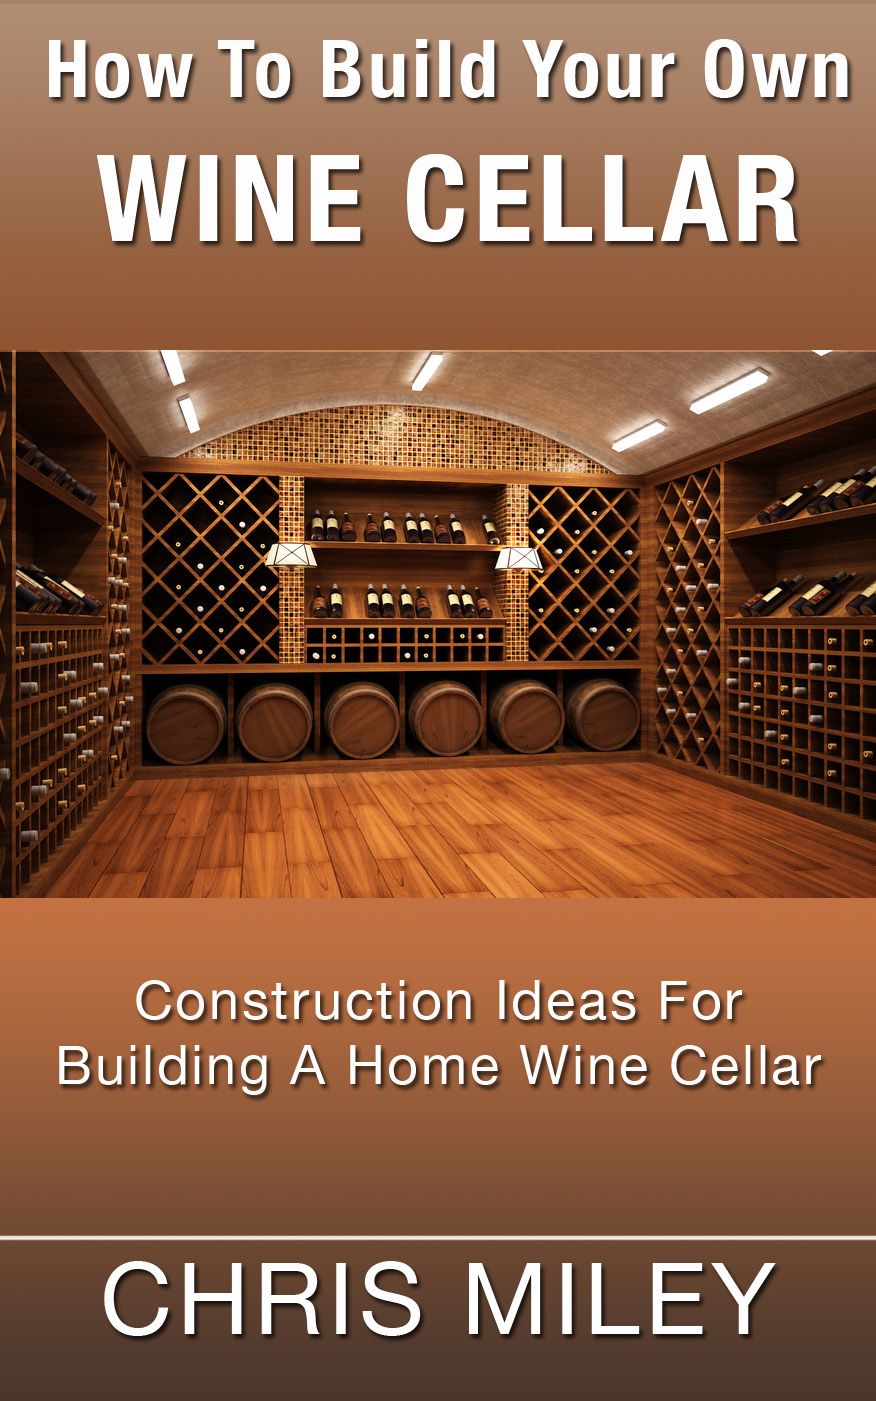 How To Build Your Own Wine Cellar book cover